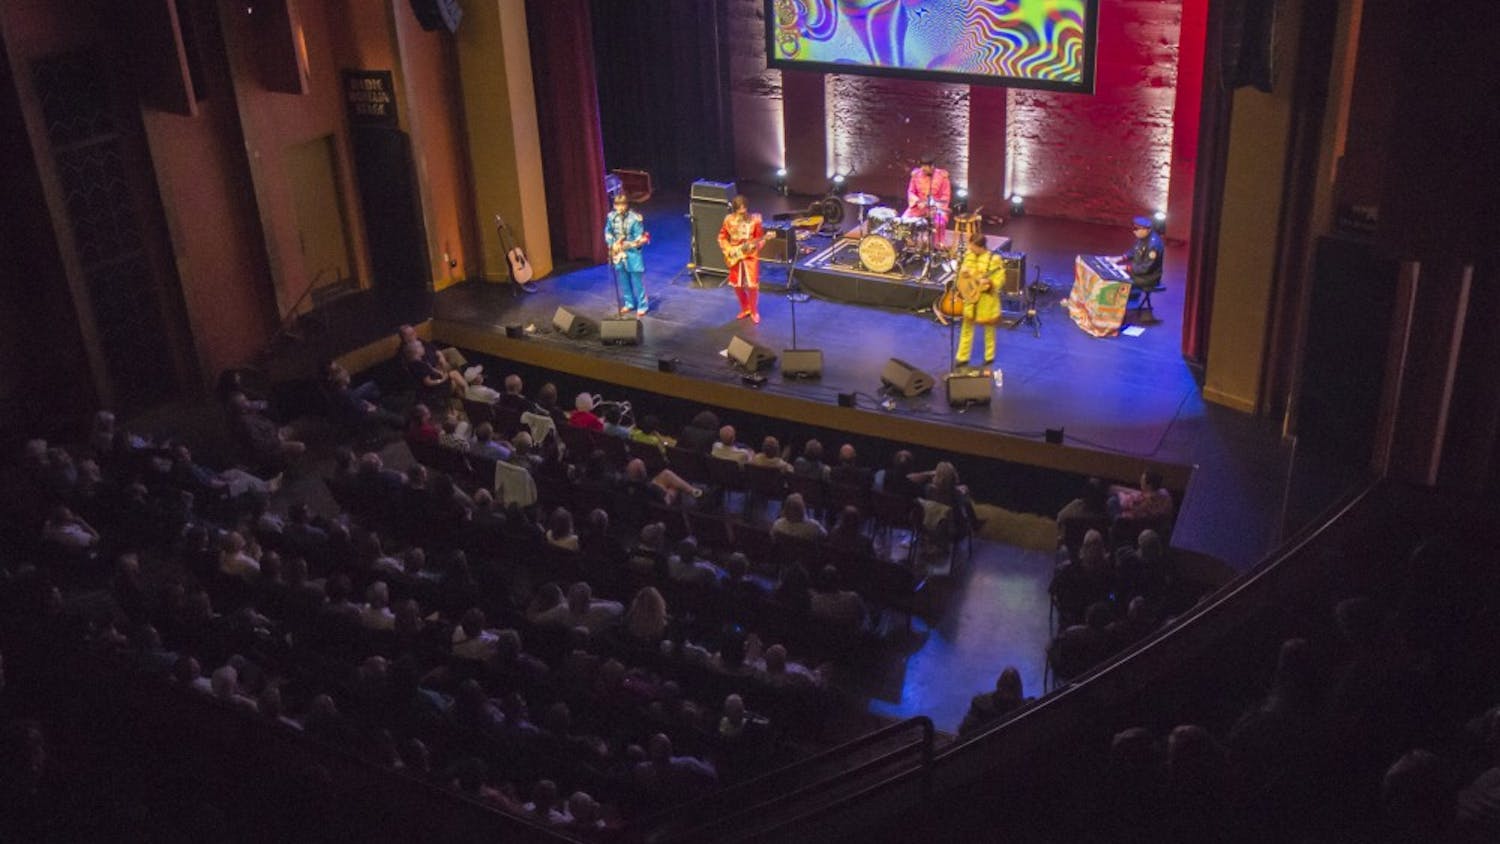 The Mersey Beatles play their set Friday night at the Buskirk-Chumley Theater, which was packed for the tribute band's third performance in Bloomington. All of the Mersey Beatles are from from Liverpool, the hometown of the original Beatles quartet. 